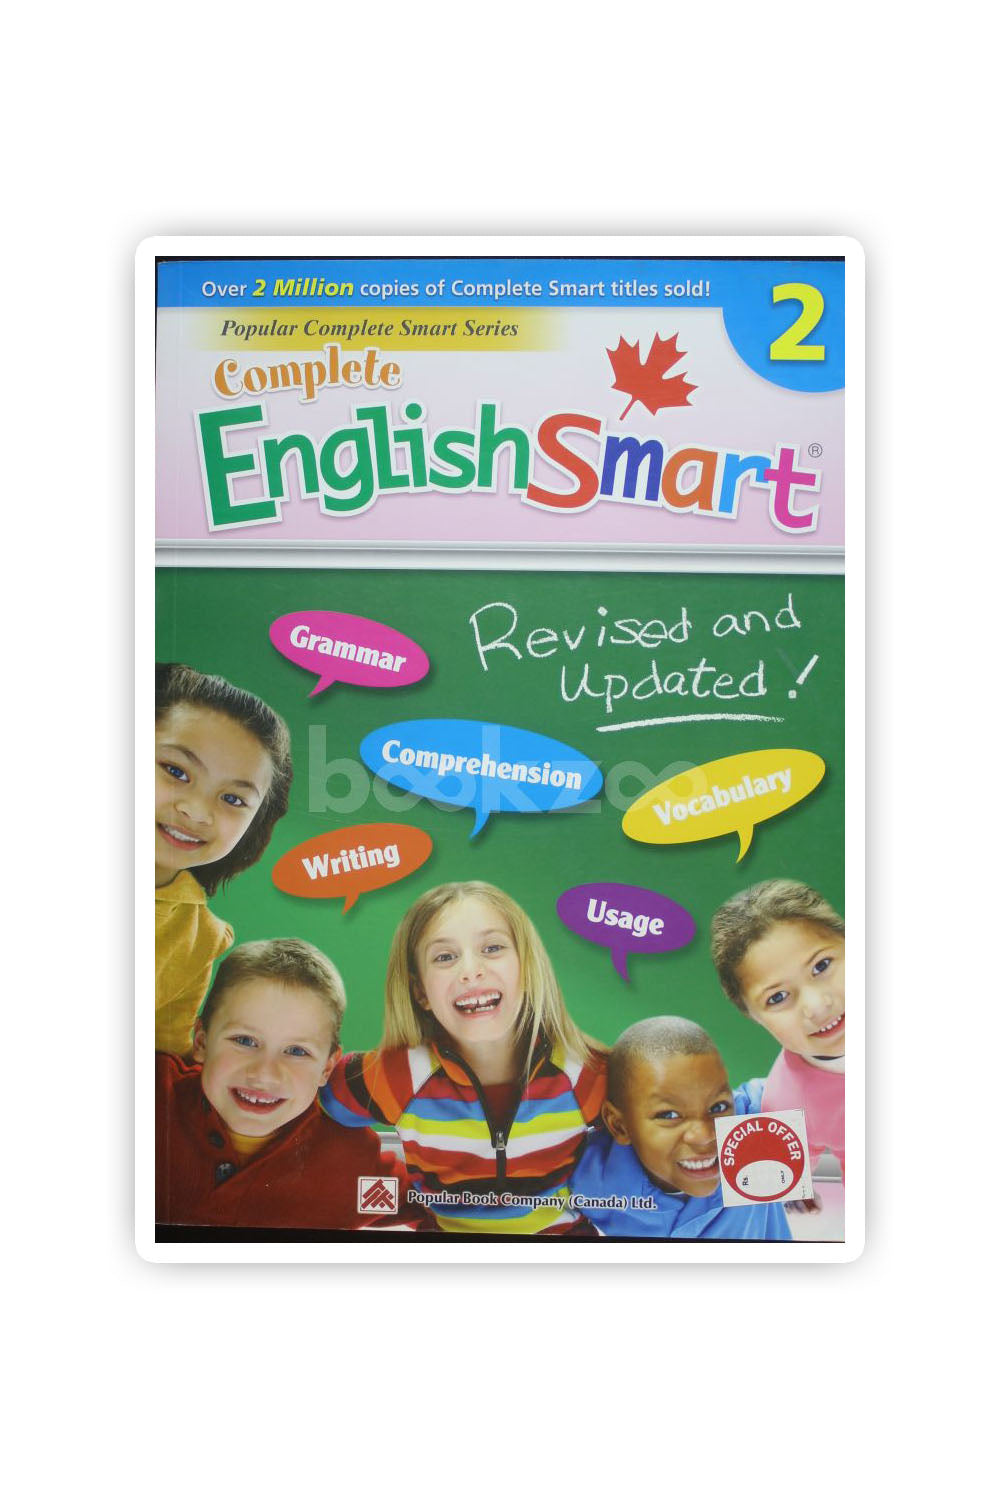 Buy Complete English Smart Grade 2 By Popular Book Company Publisher At Online Bookstore 7536